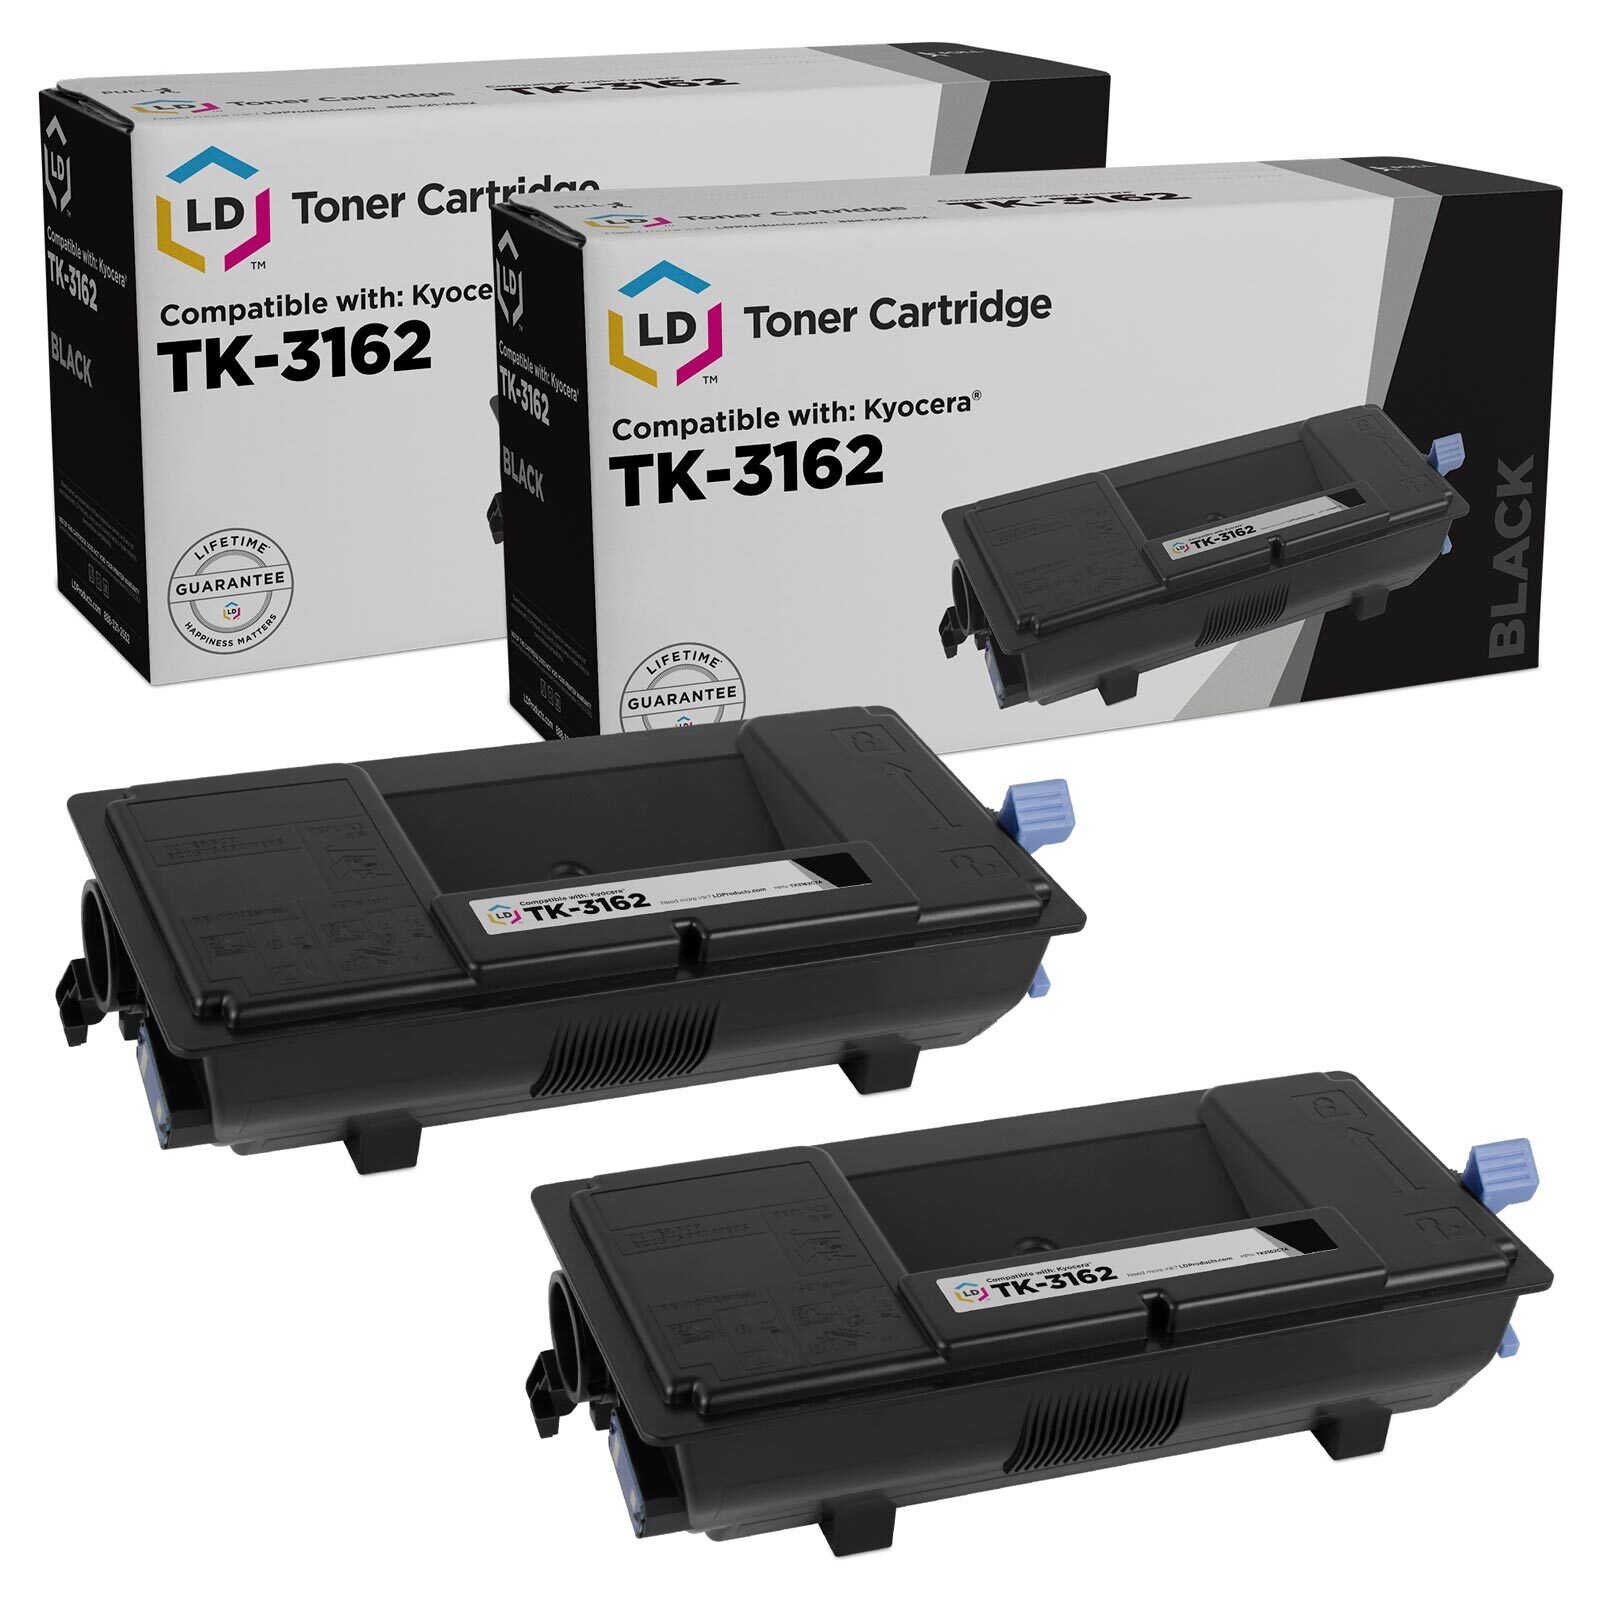 LD Compatible Kyocera TK-3162 (1T02T90US0) Black Toner 2-Pack for ECOSYS P3045dn